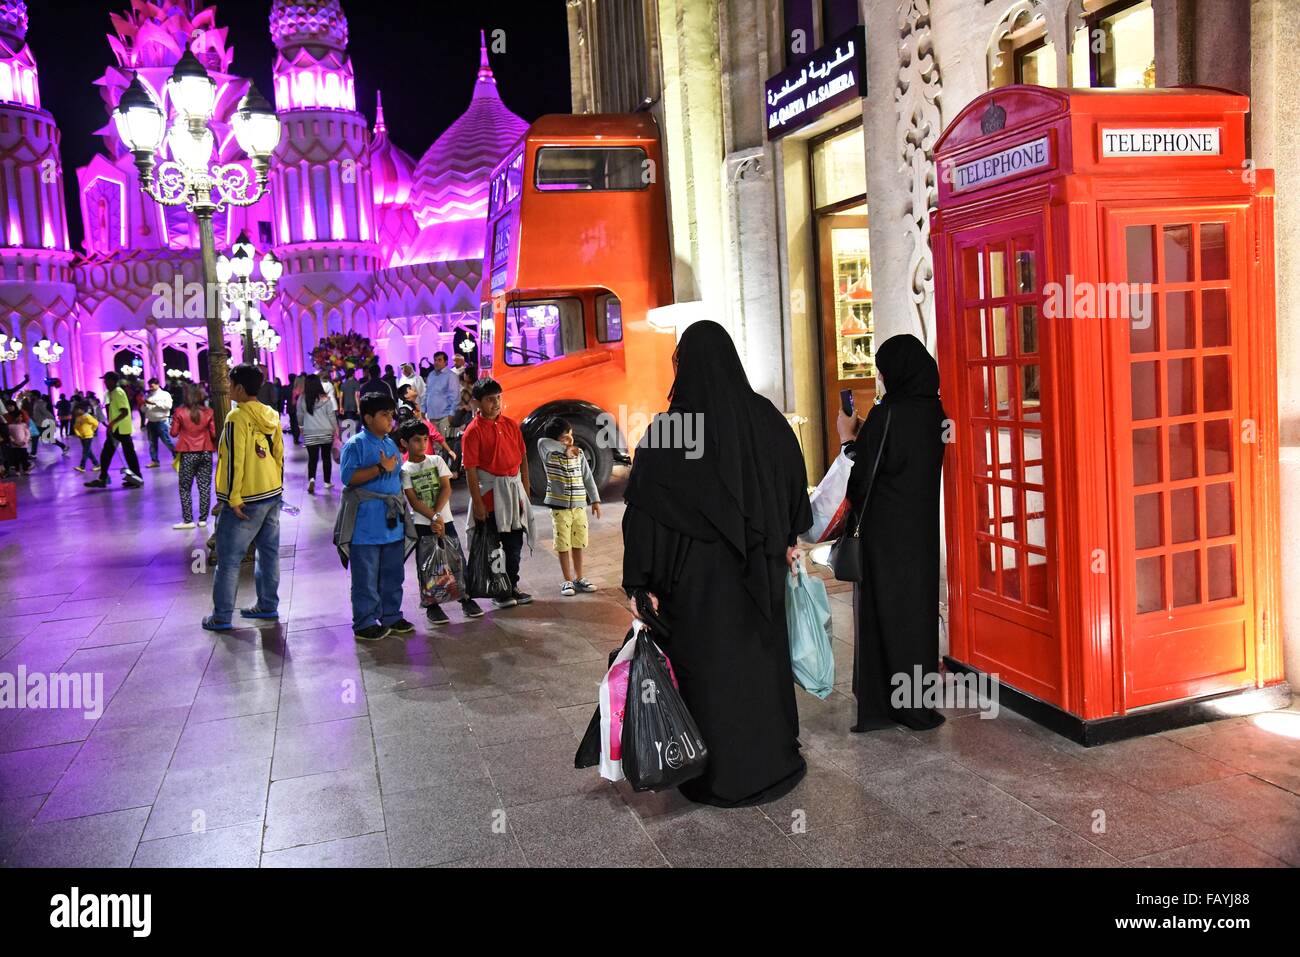 Global Village Dubailand, Dubai, UAE claimed to be the world's largest tourism, leisure and entertainment project. Stock Photo